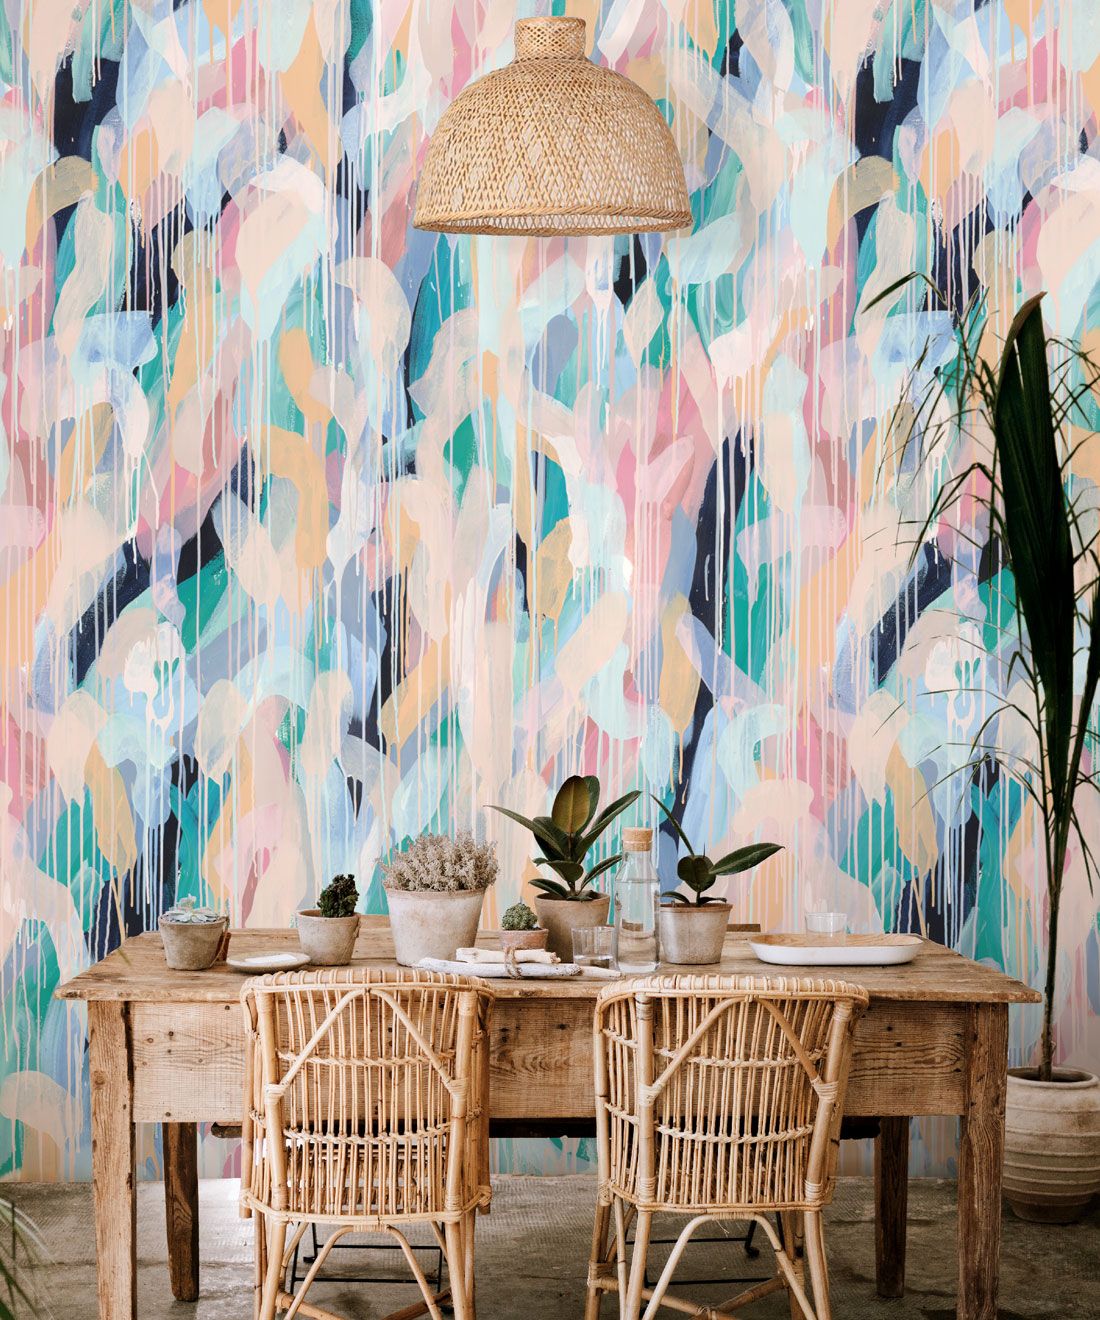 Blue Moon Wallpaper • Colourful Painterly Wallpaper • Tiff Manuell • Abstract Expressionist Wallpaper • Close Up Insitu